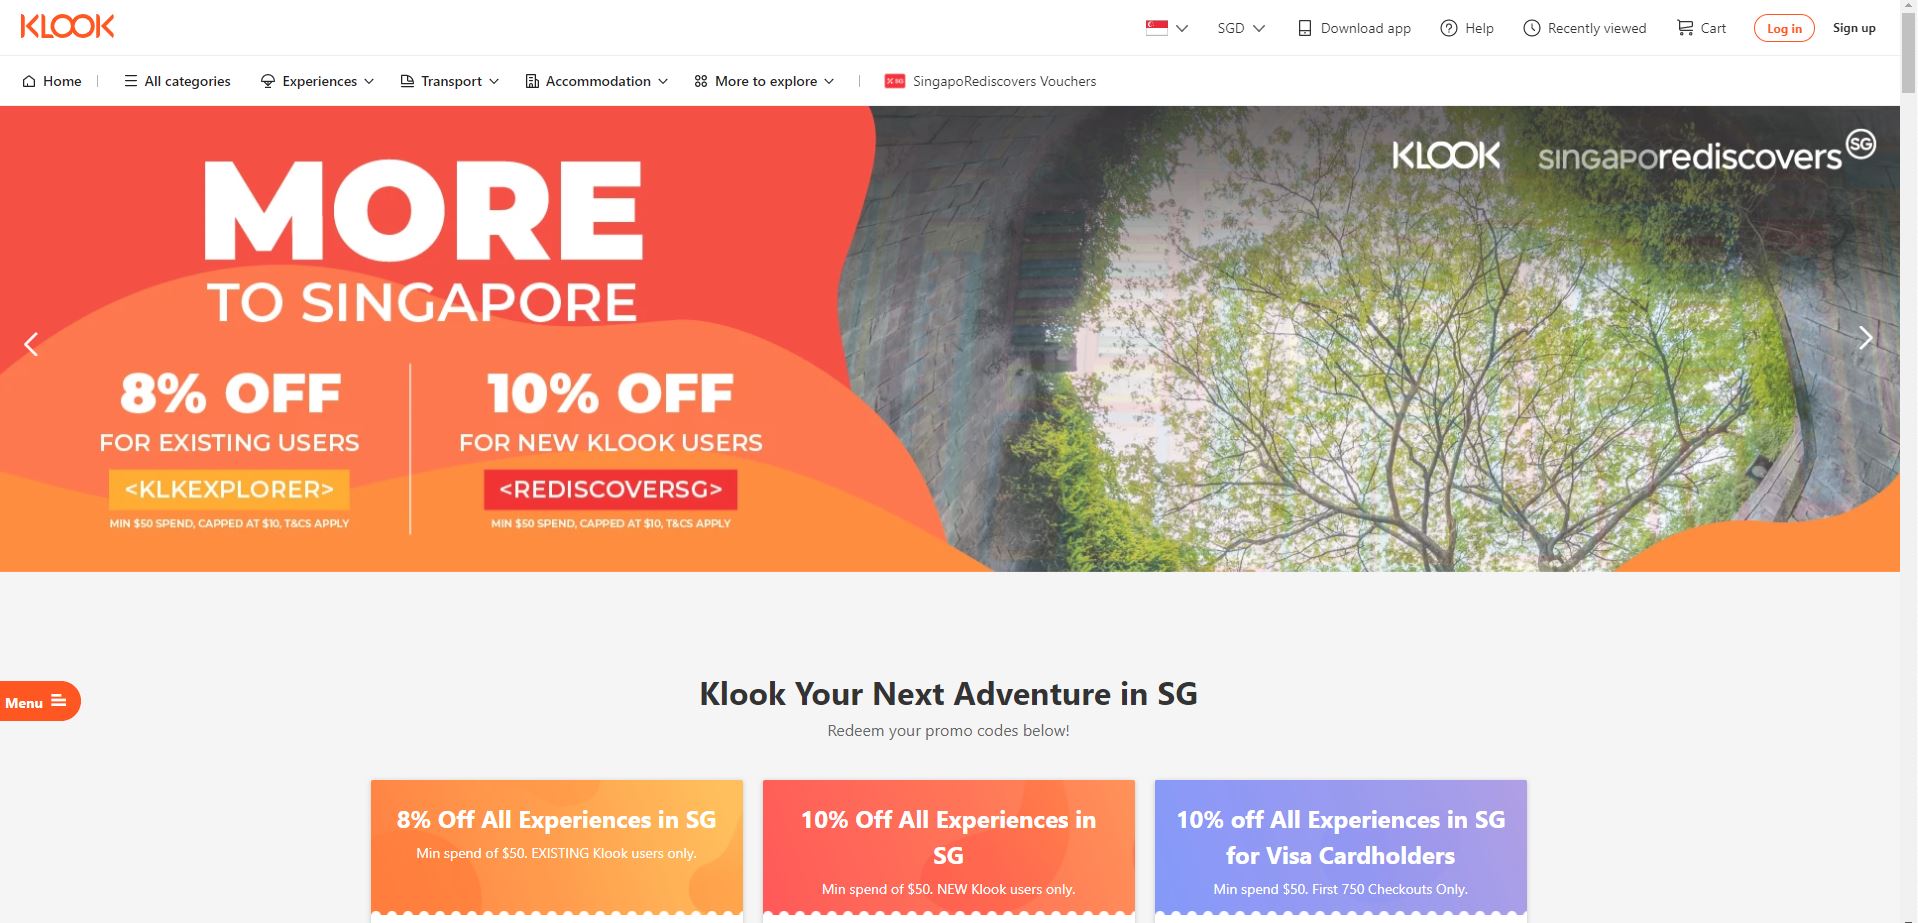 Klook's More To Singapore Promo